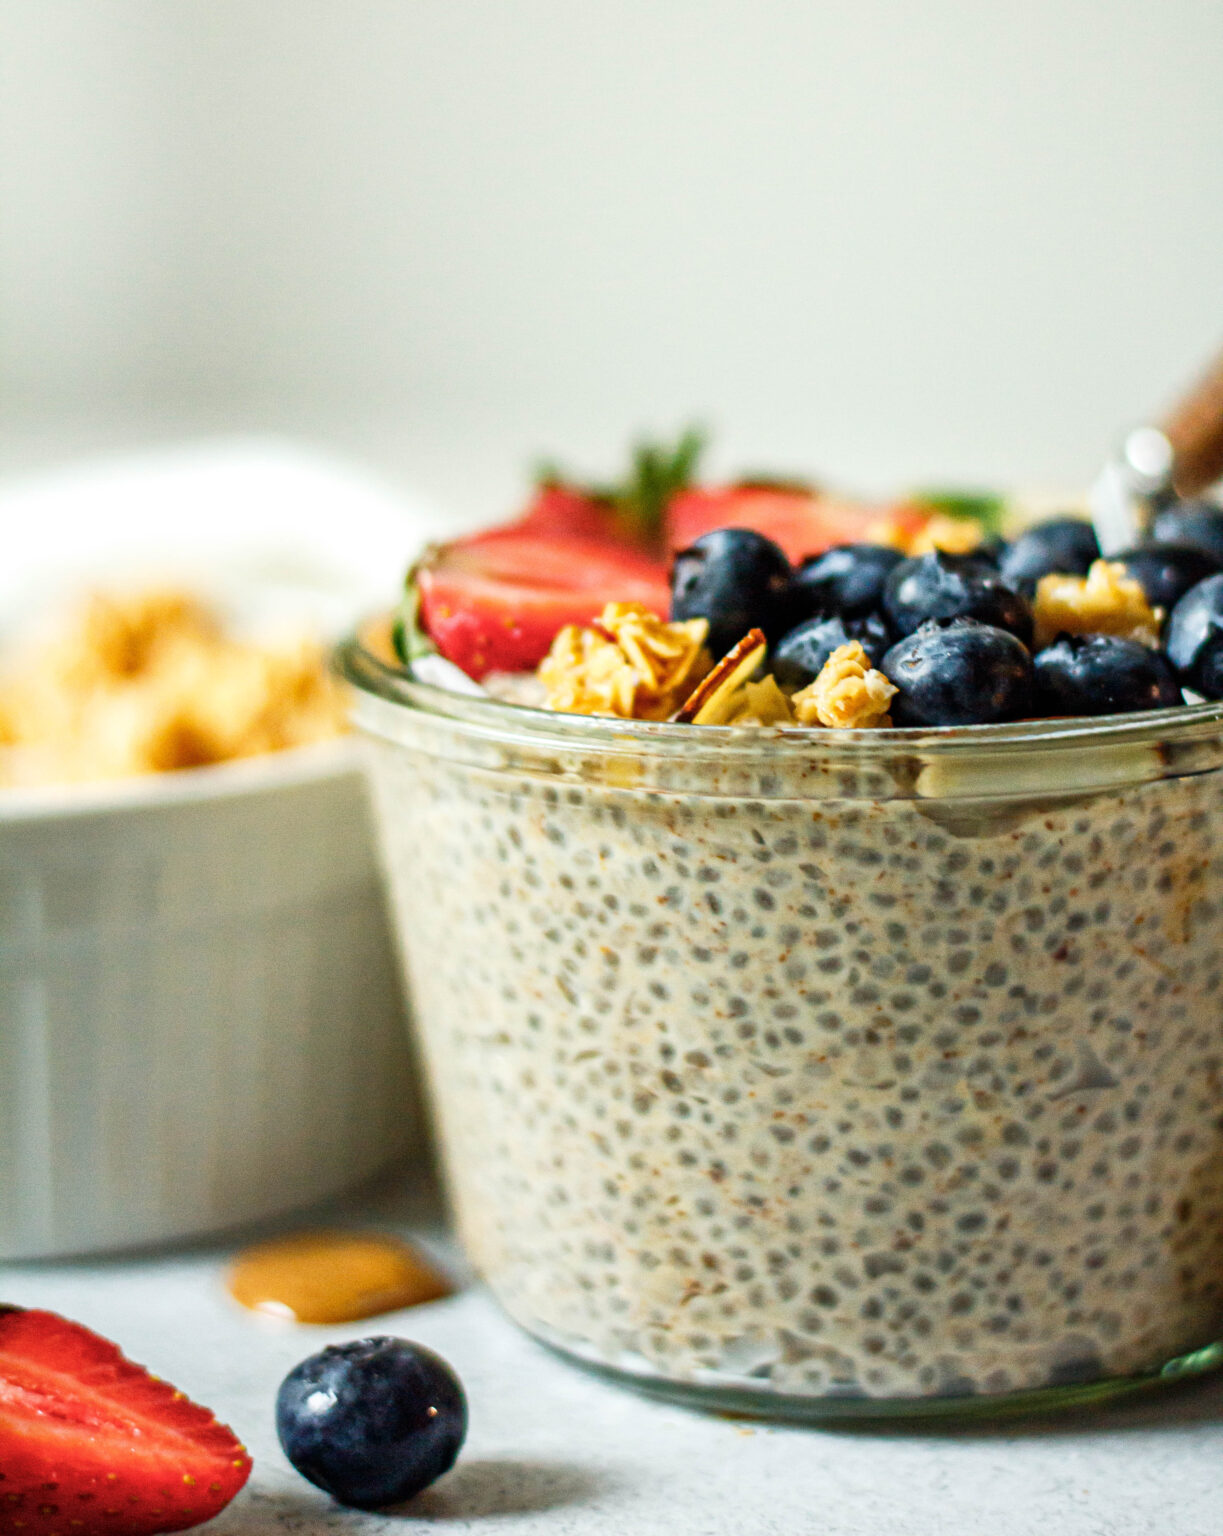 Vanilla Chia Pudding - All the Healthy Things